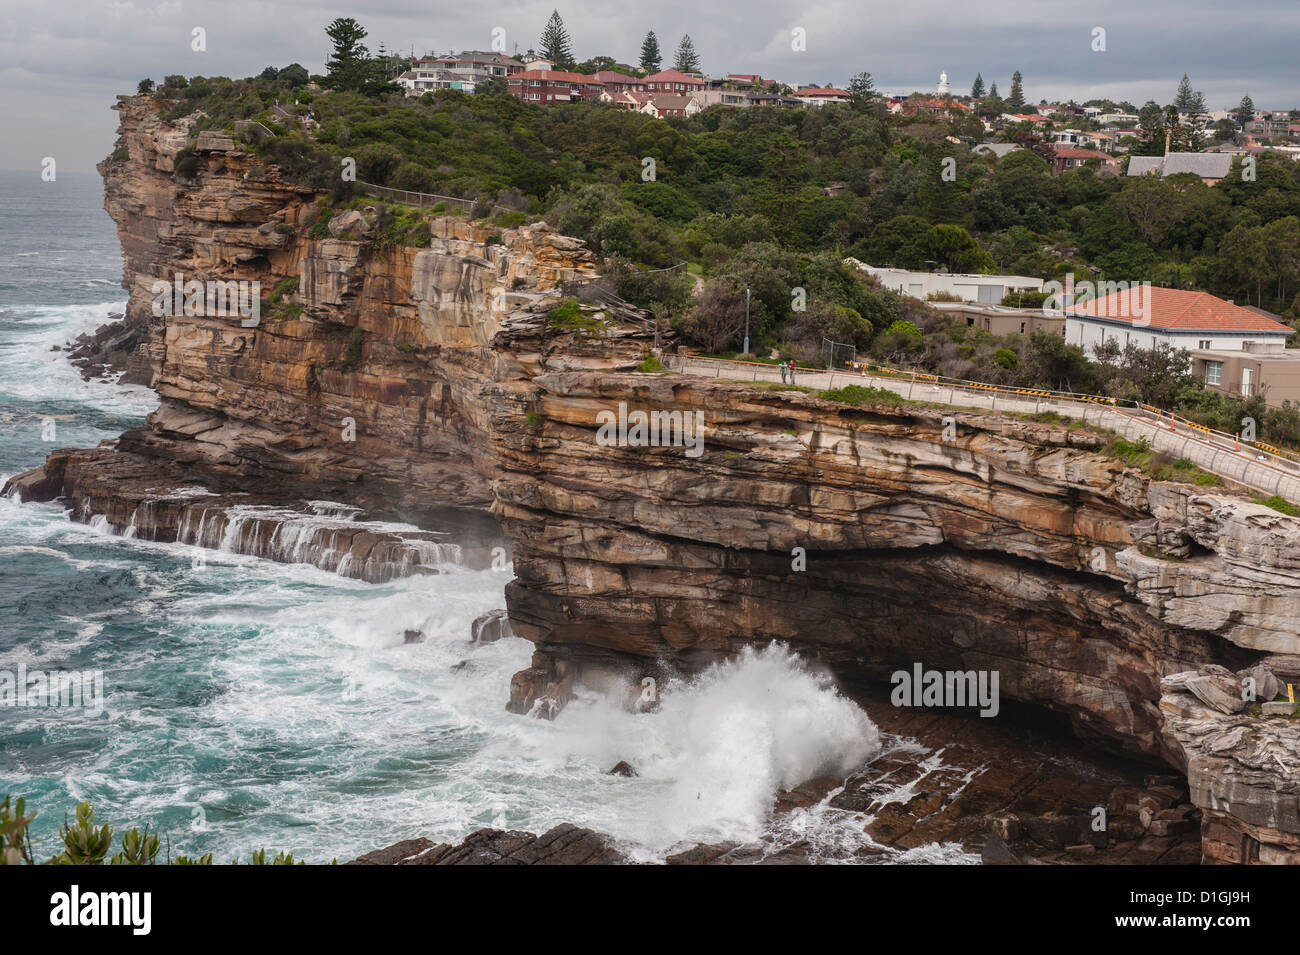 The walk along the sea front in the Eastern suburbs of Sydney is stunning with great views on the beaches and the Tasman Sea. Stock Photo